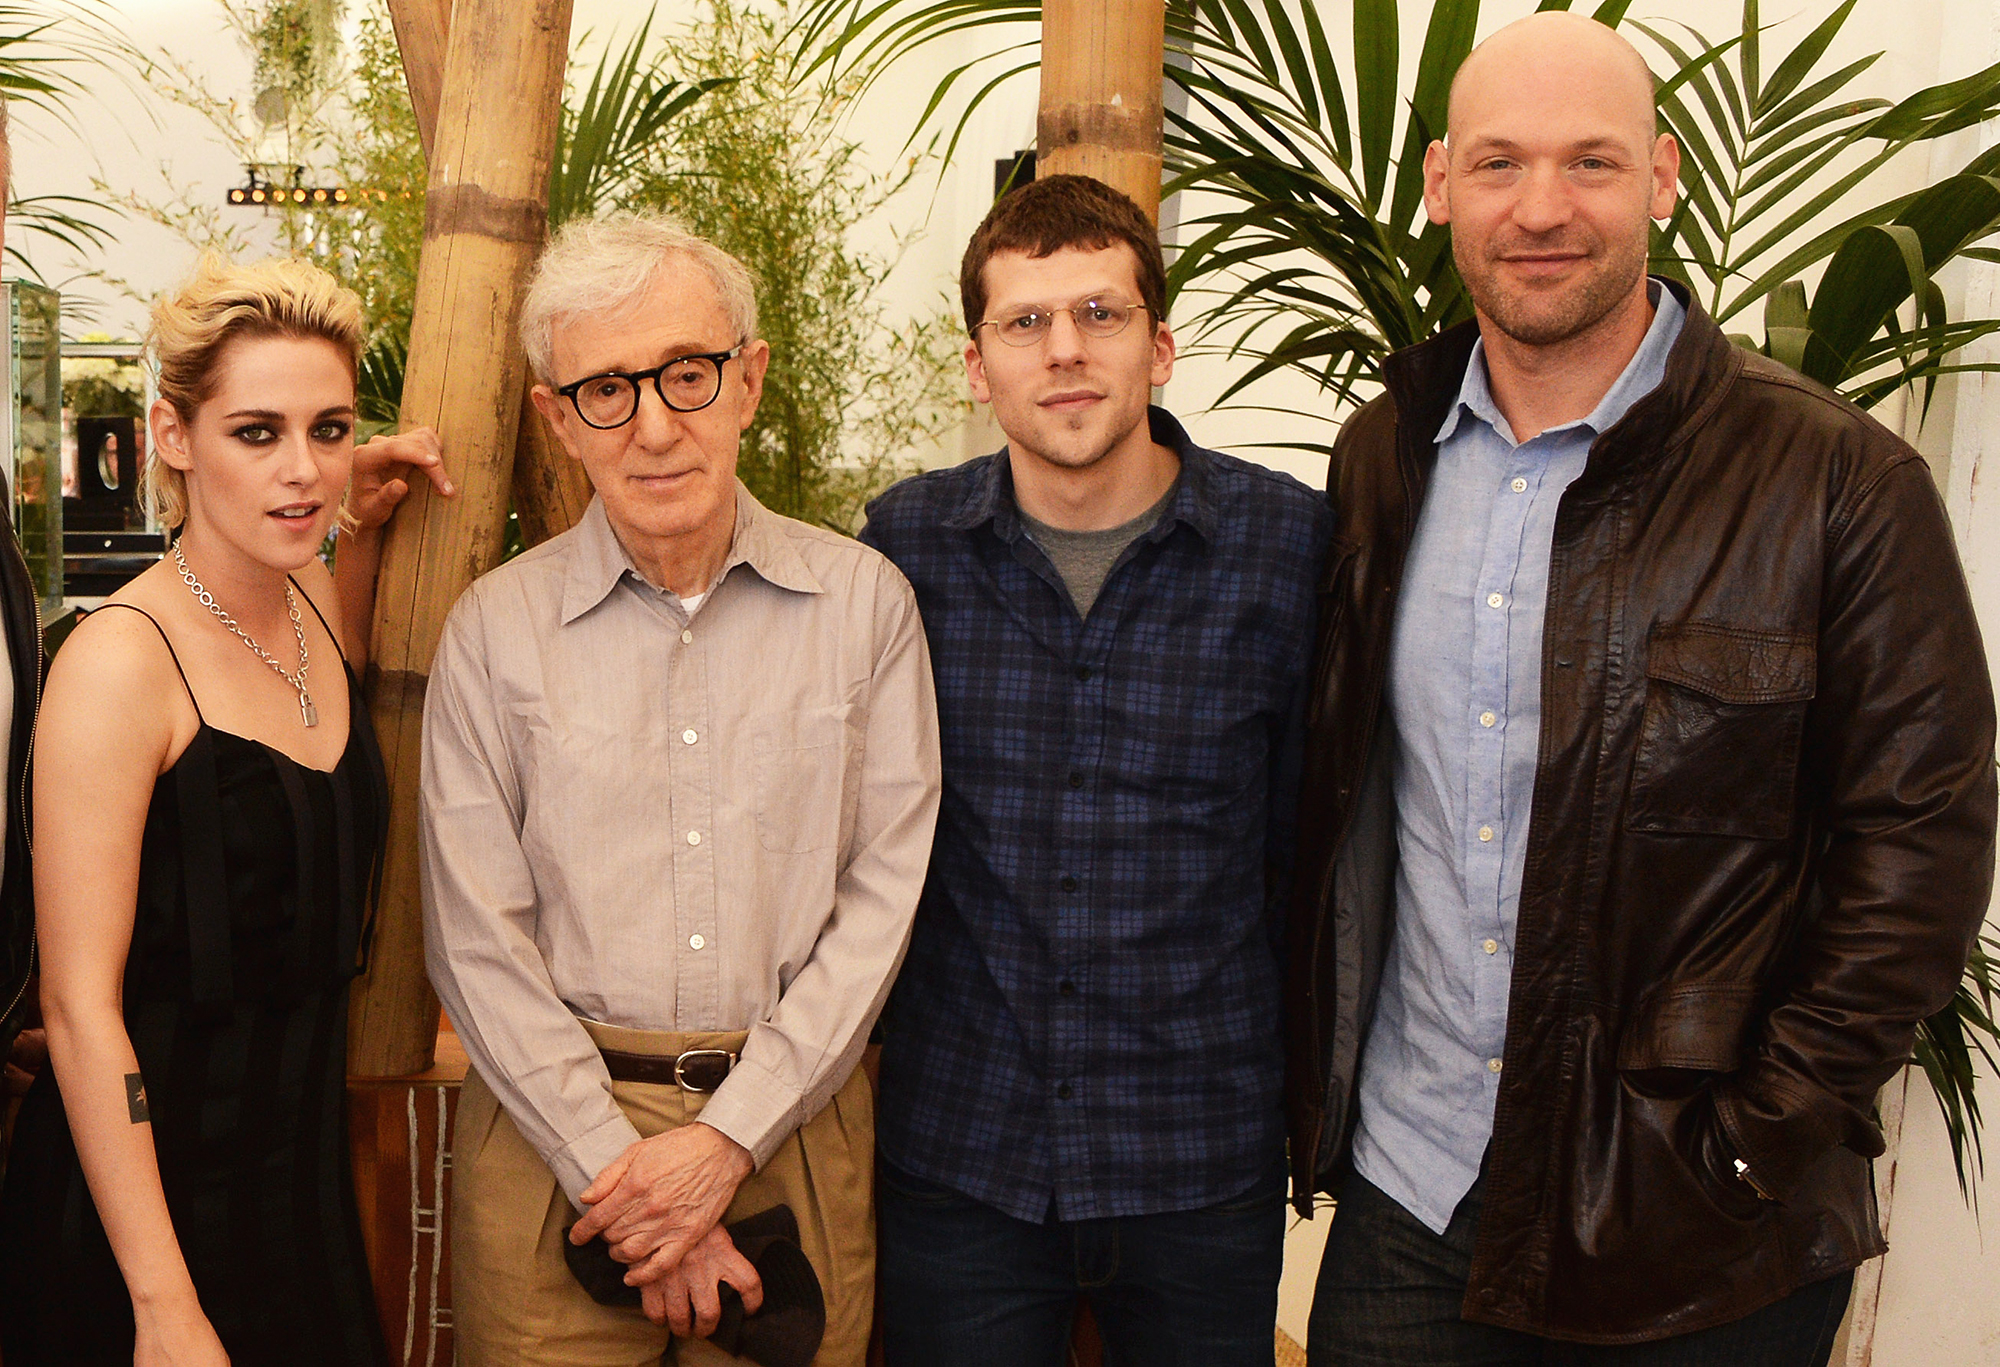 From left: Kristen Stewart, Woody Allen, Jesse Eisenberg and Corey Stoll on May 12, 2016 in Cannes, France.